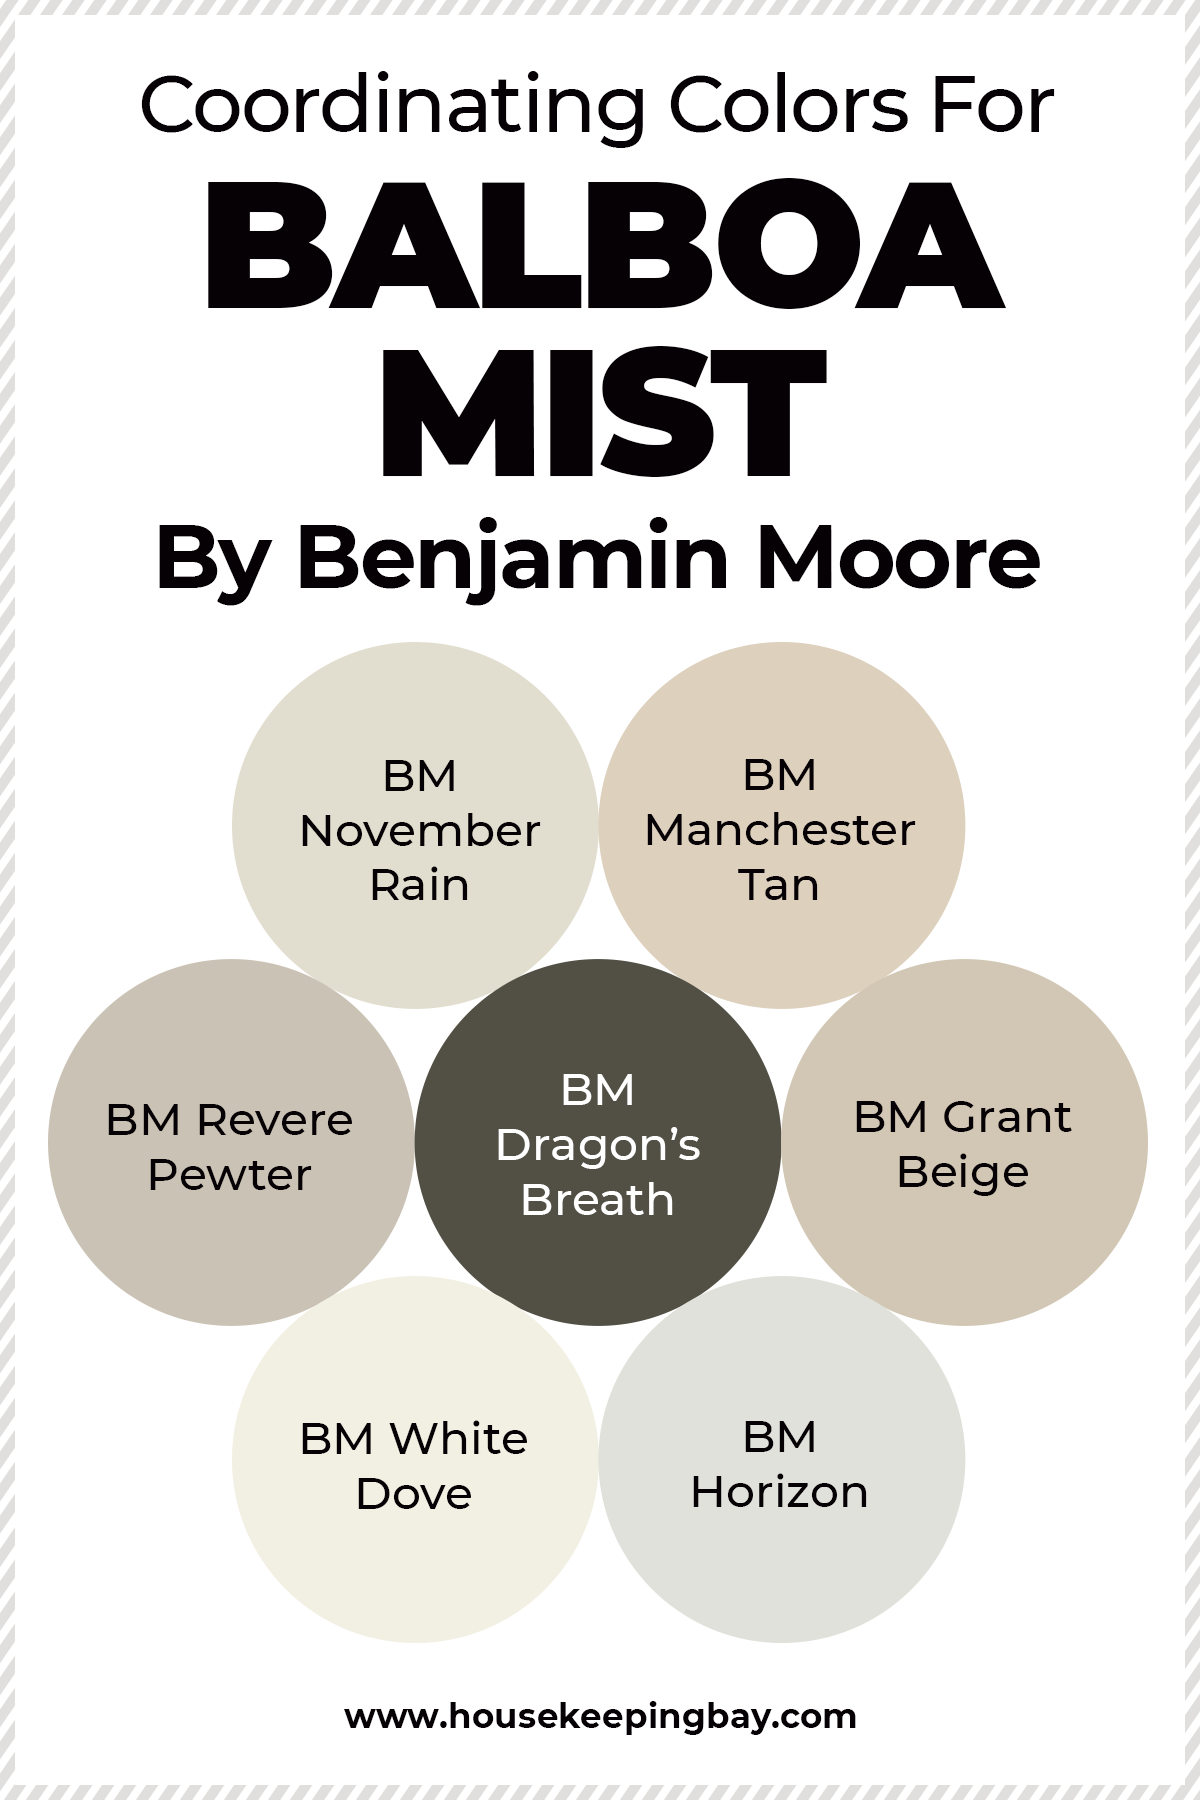 Coordinating Colors For Balboa Mist By Benjamin Moore